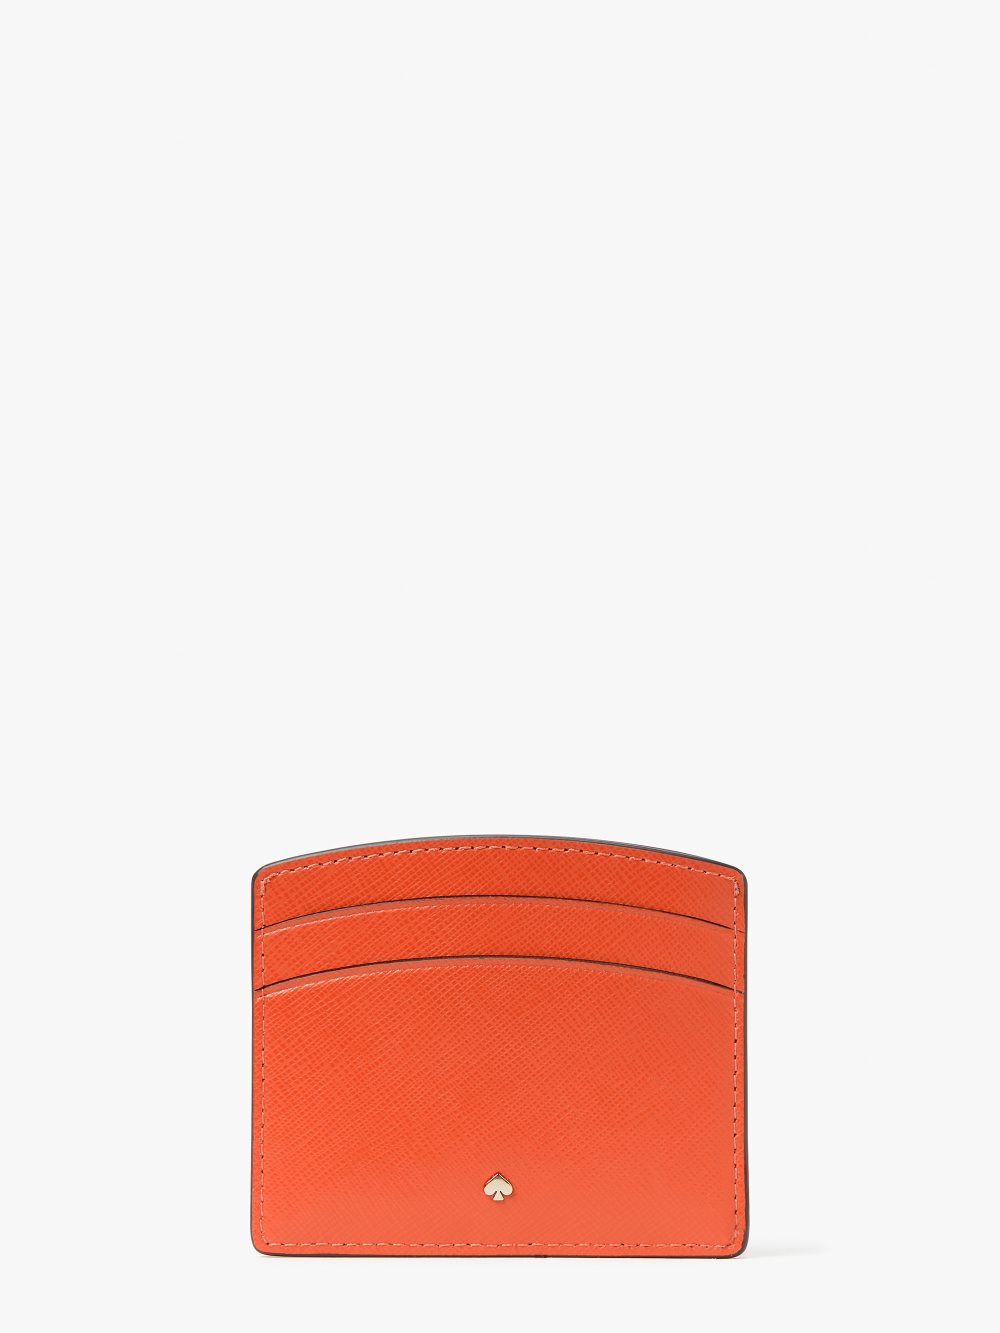 Women's dried apricot spencer cardholder | Kate Spade